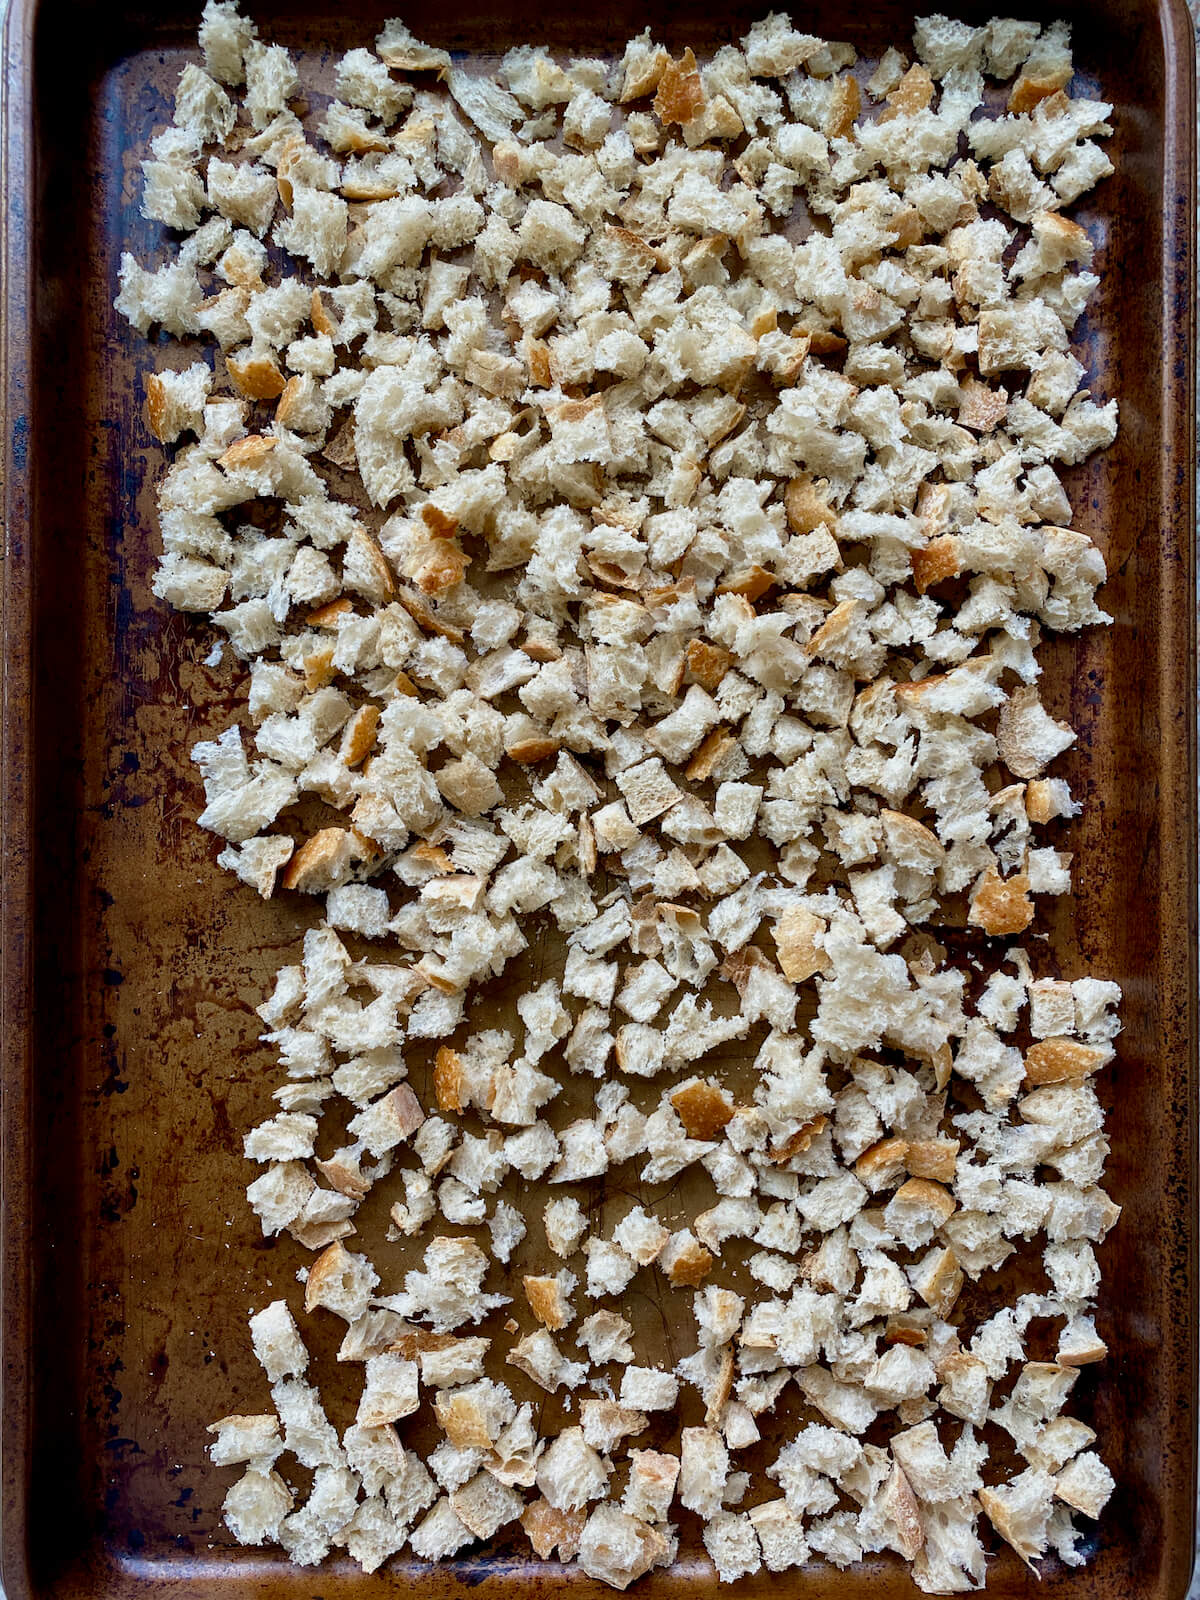 Dried bread cubes on a rimmed baking sheet.